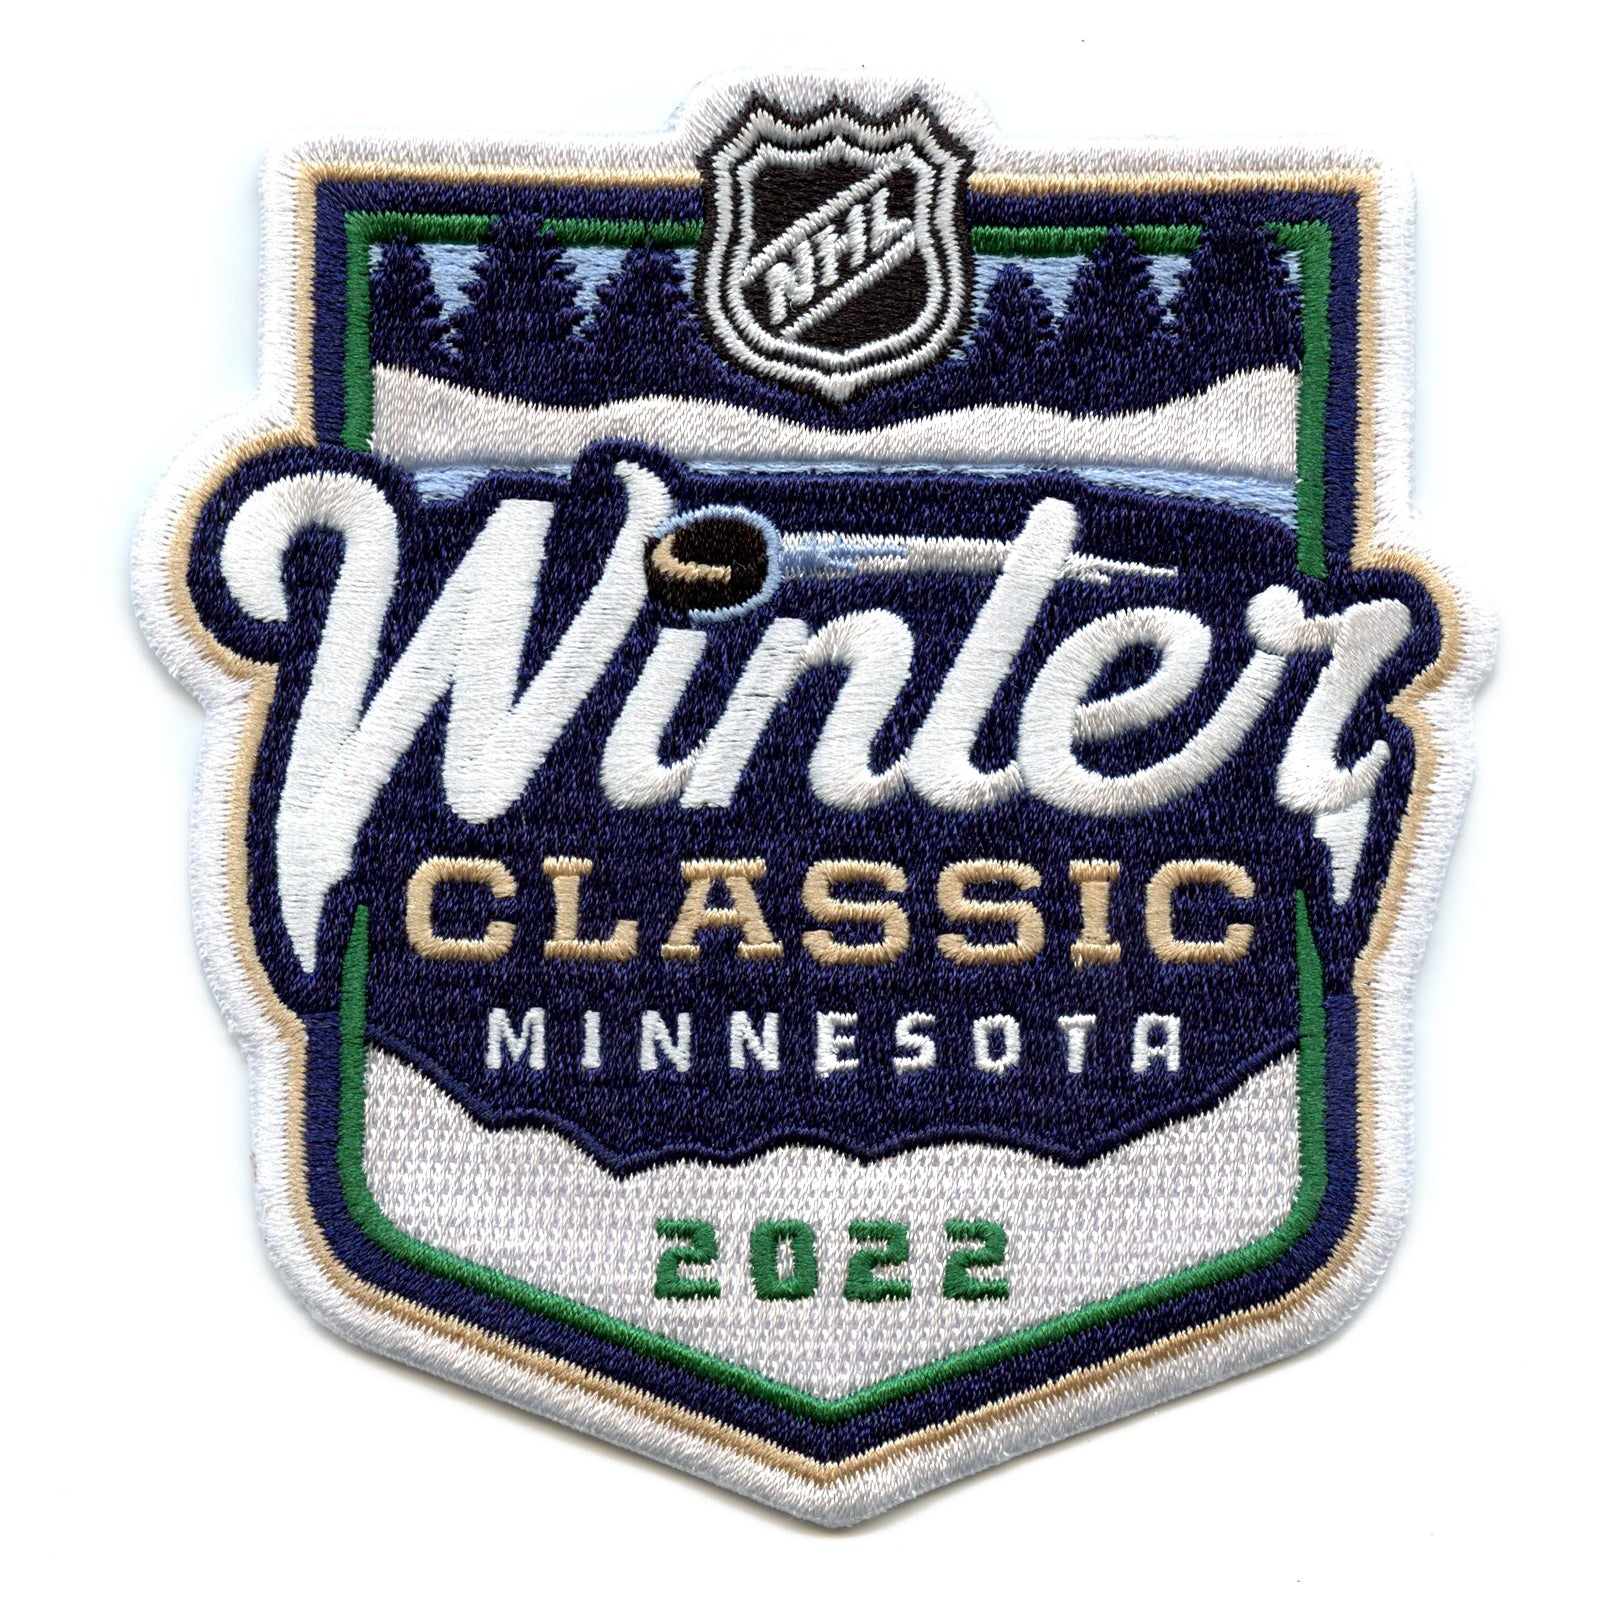 Brand new authentic Minnesota Wild winter classic jersey with tags